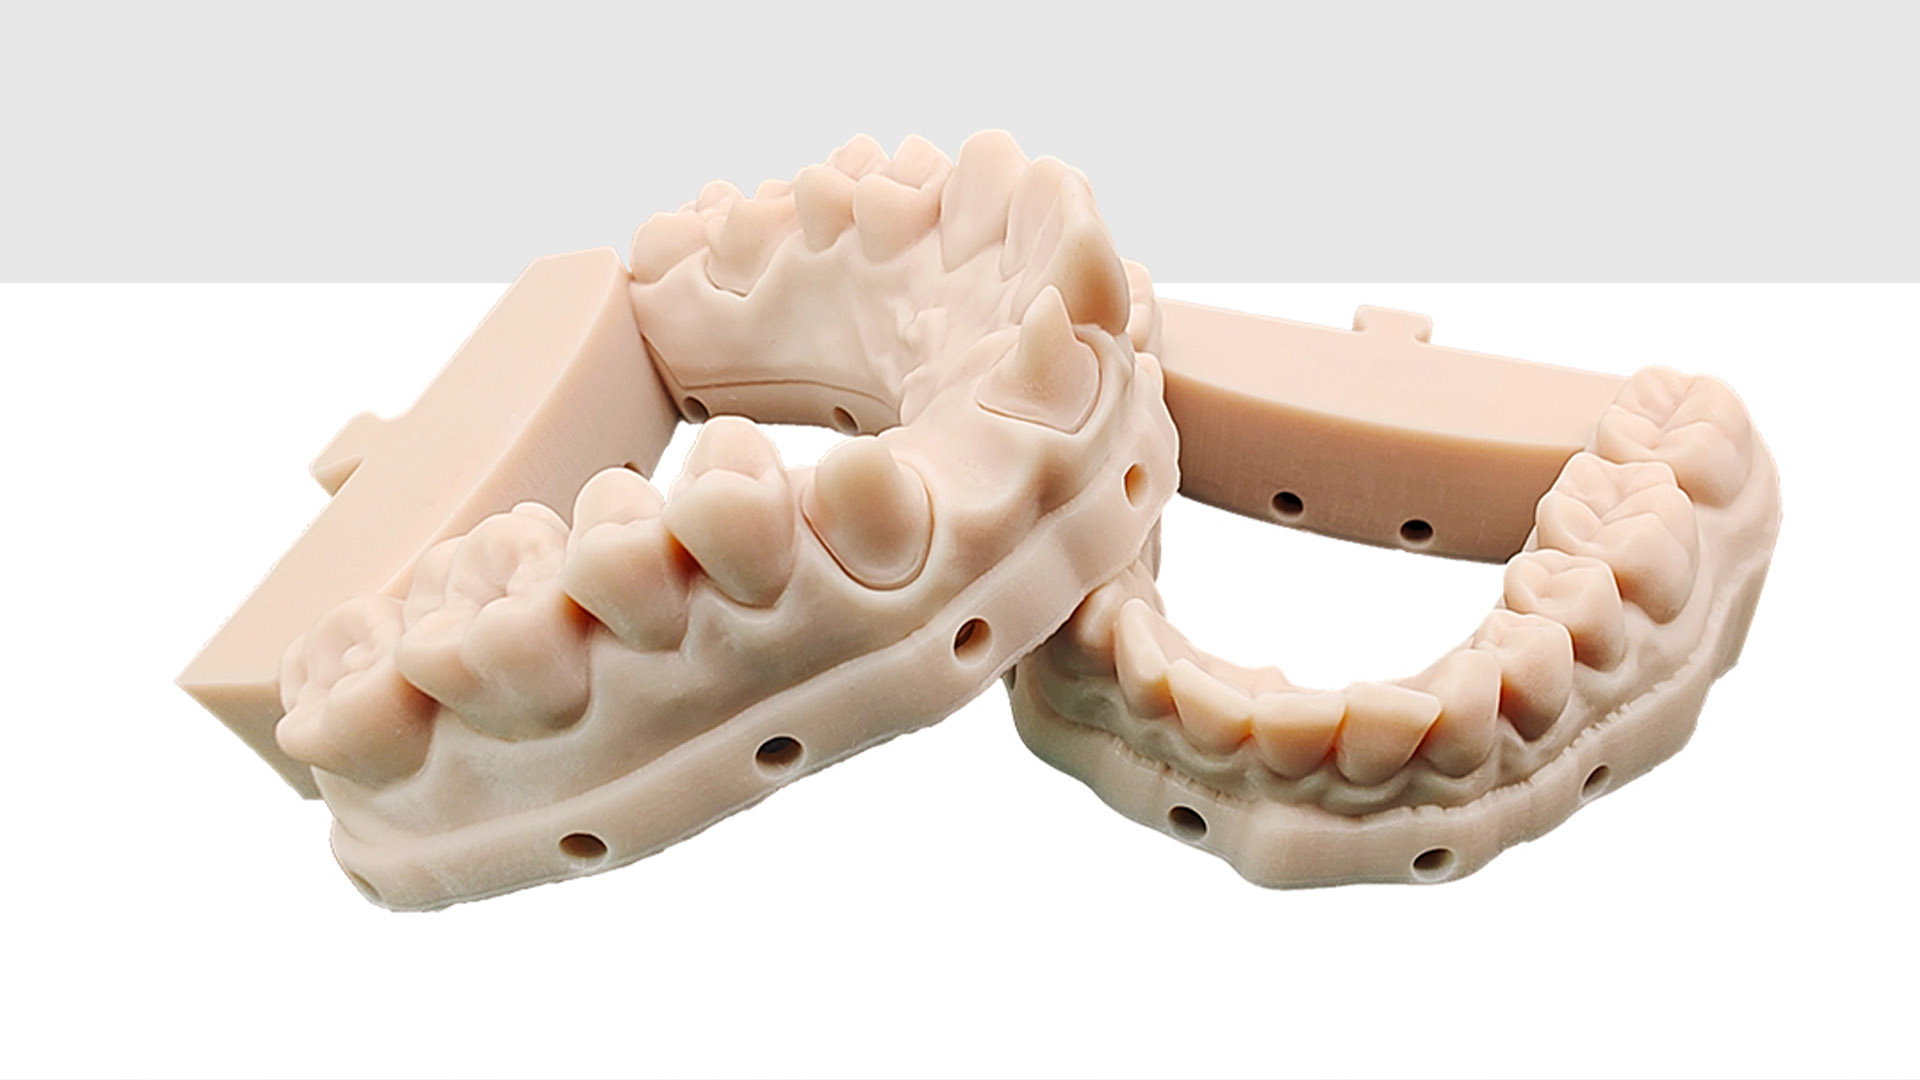 Applications of 3D Printers in the Dental Industry